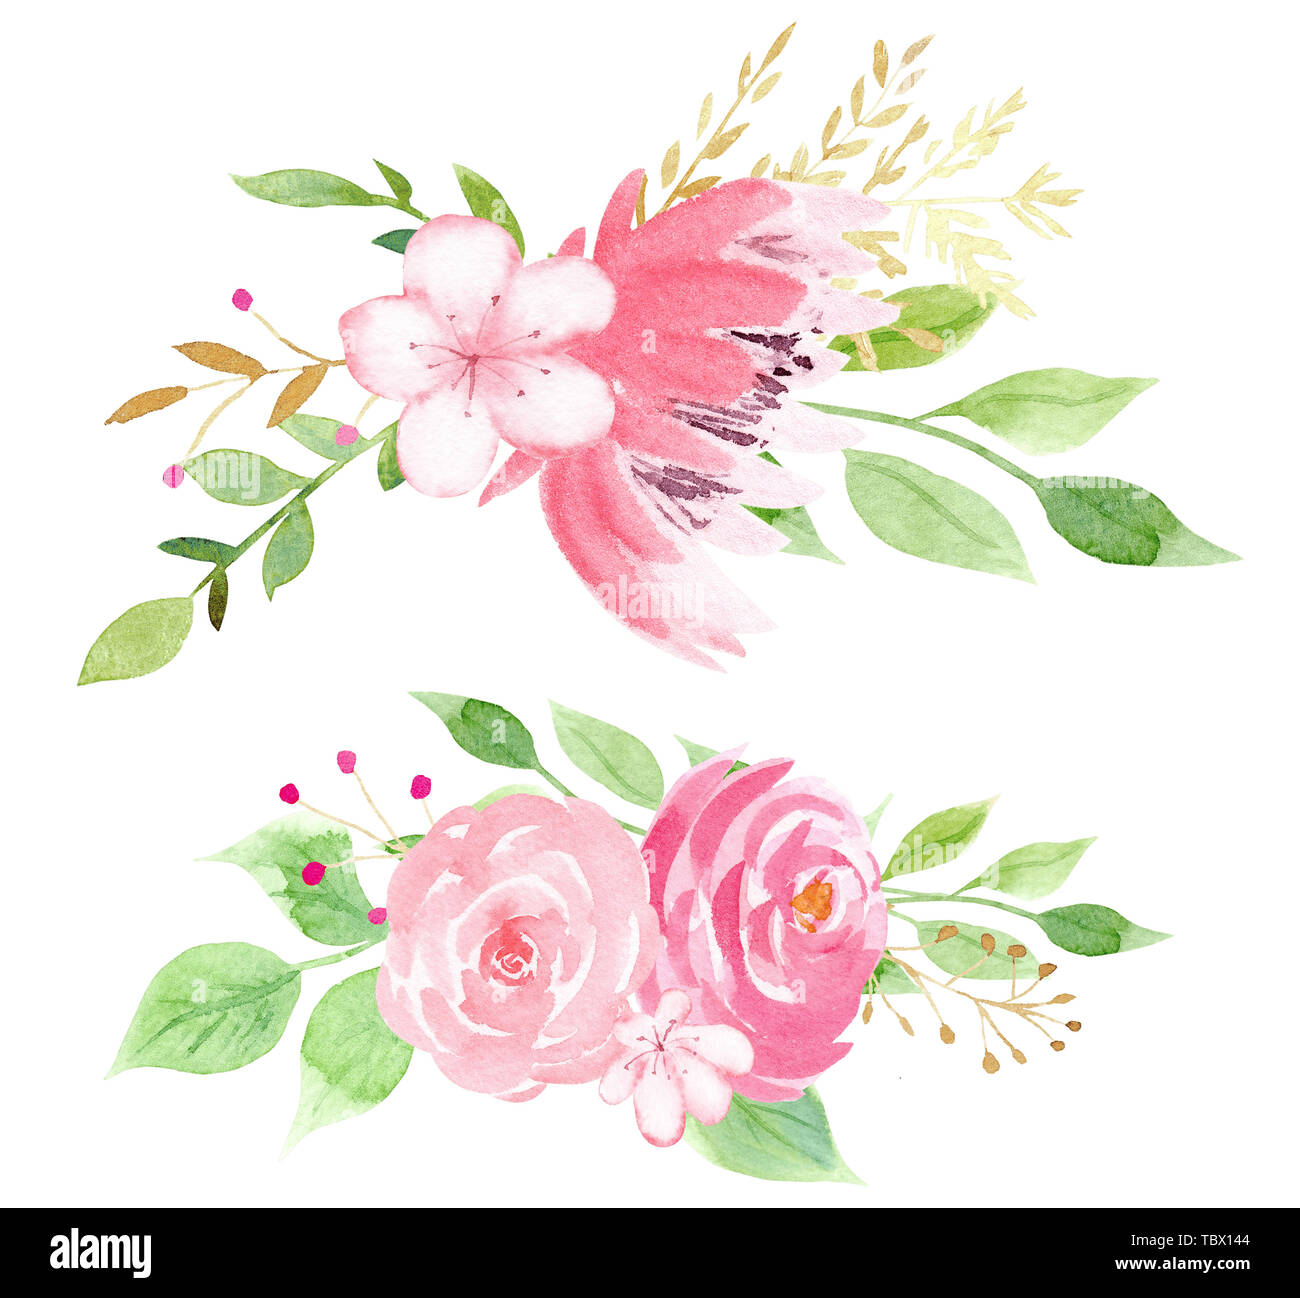 Pink blossom with leaves raster illustration Stock Photo